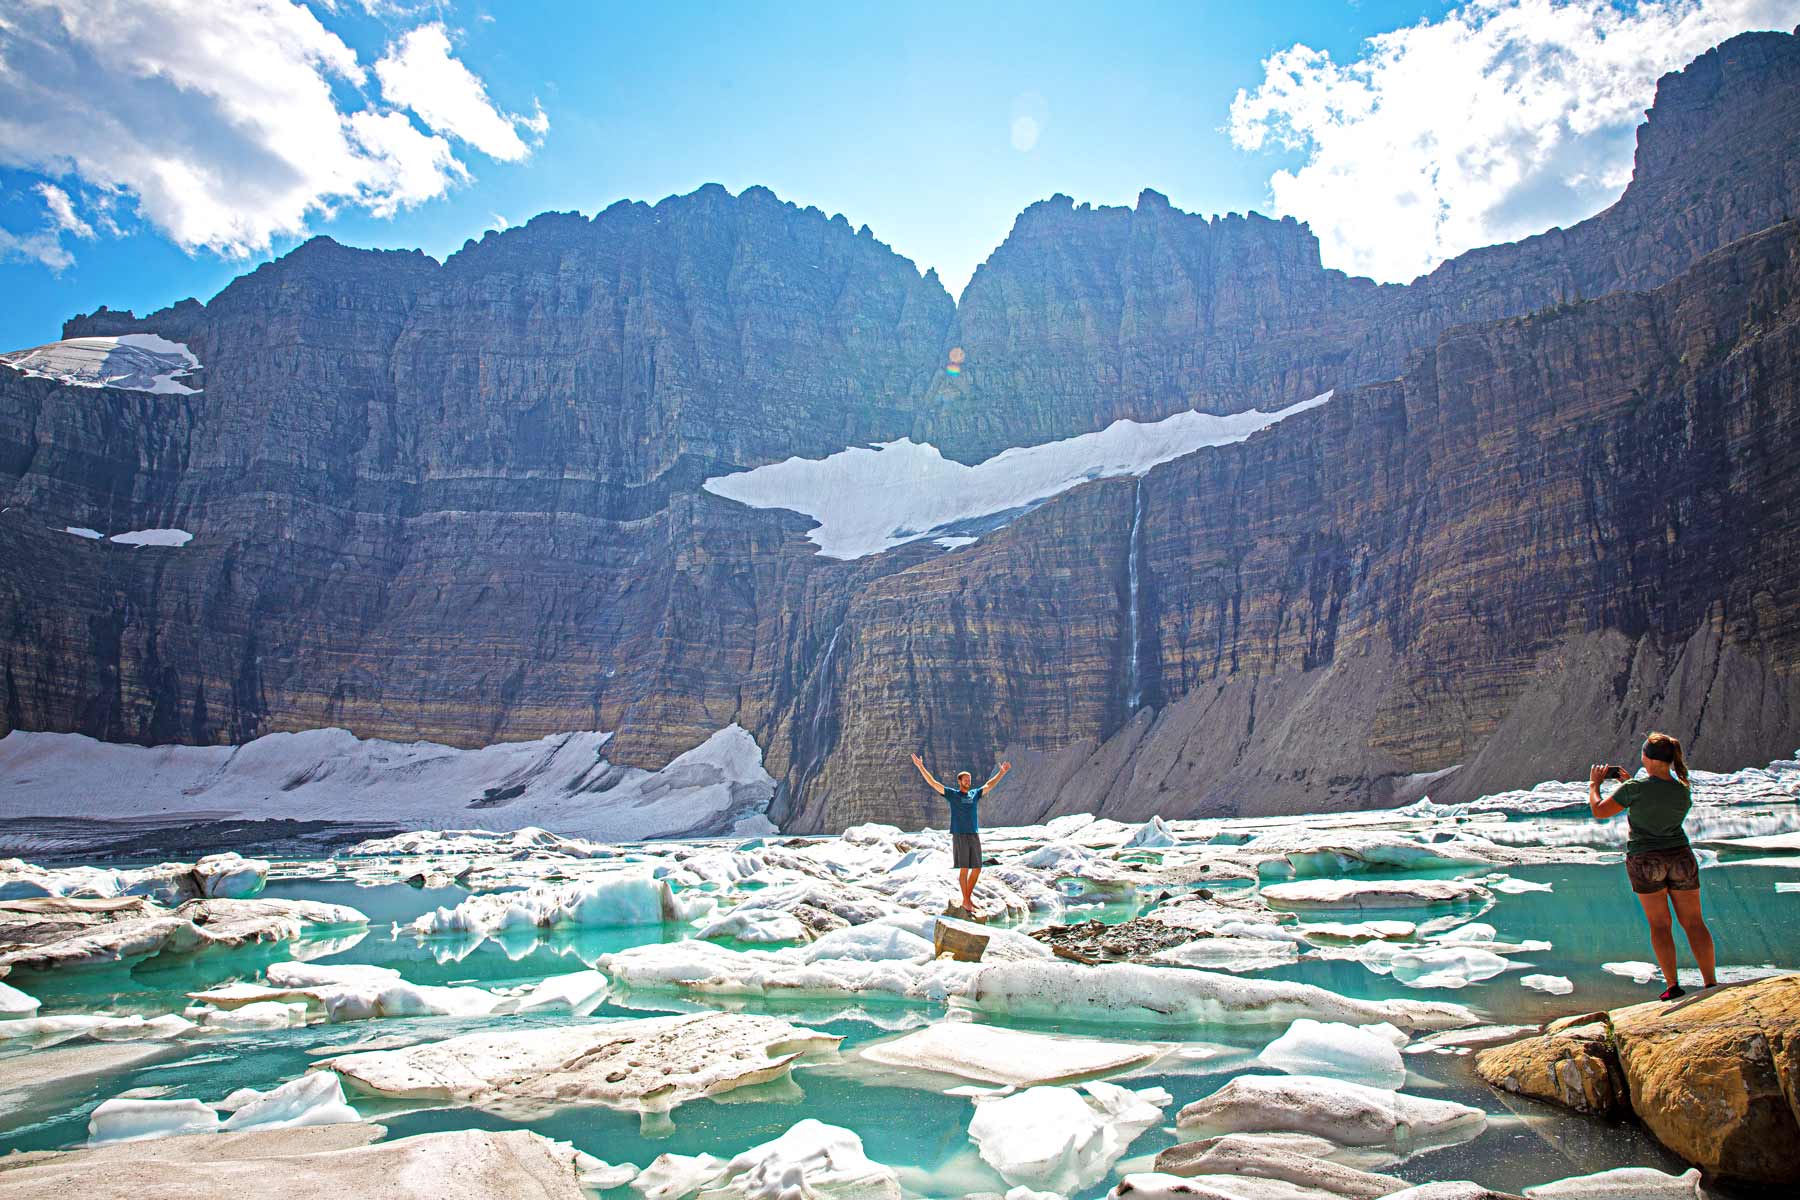 Montana National Parks, grinnell glacier, things to do glacier national park